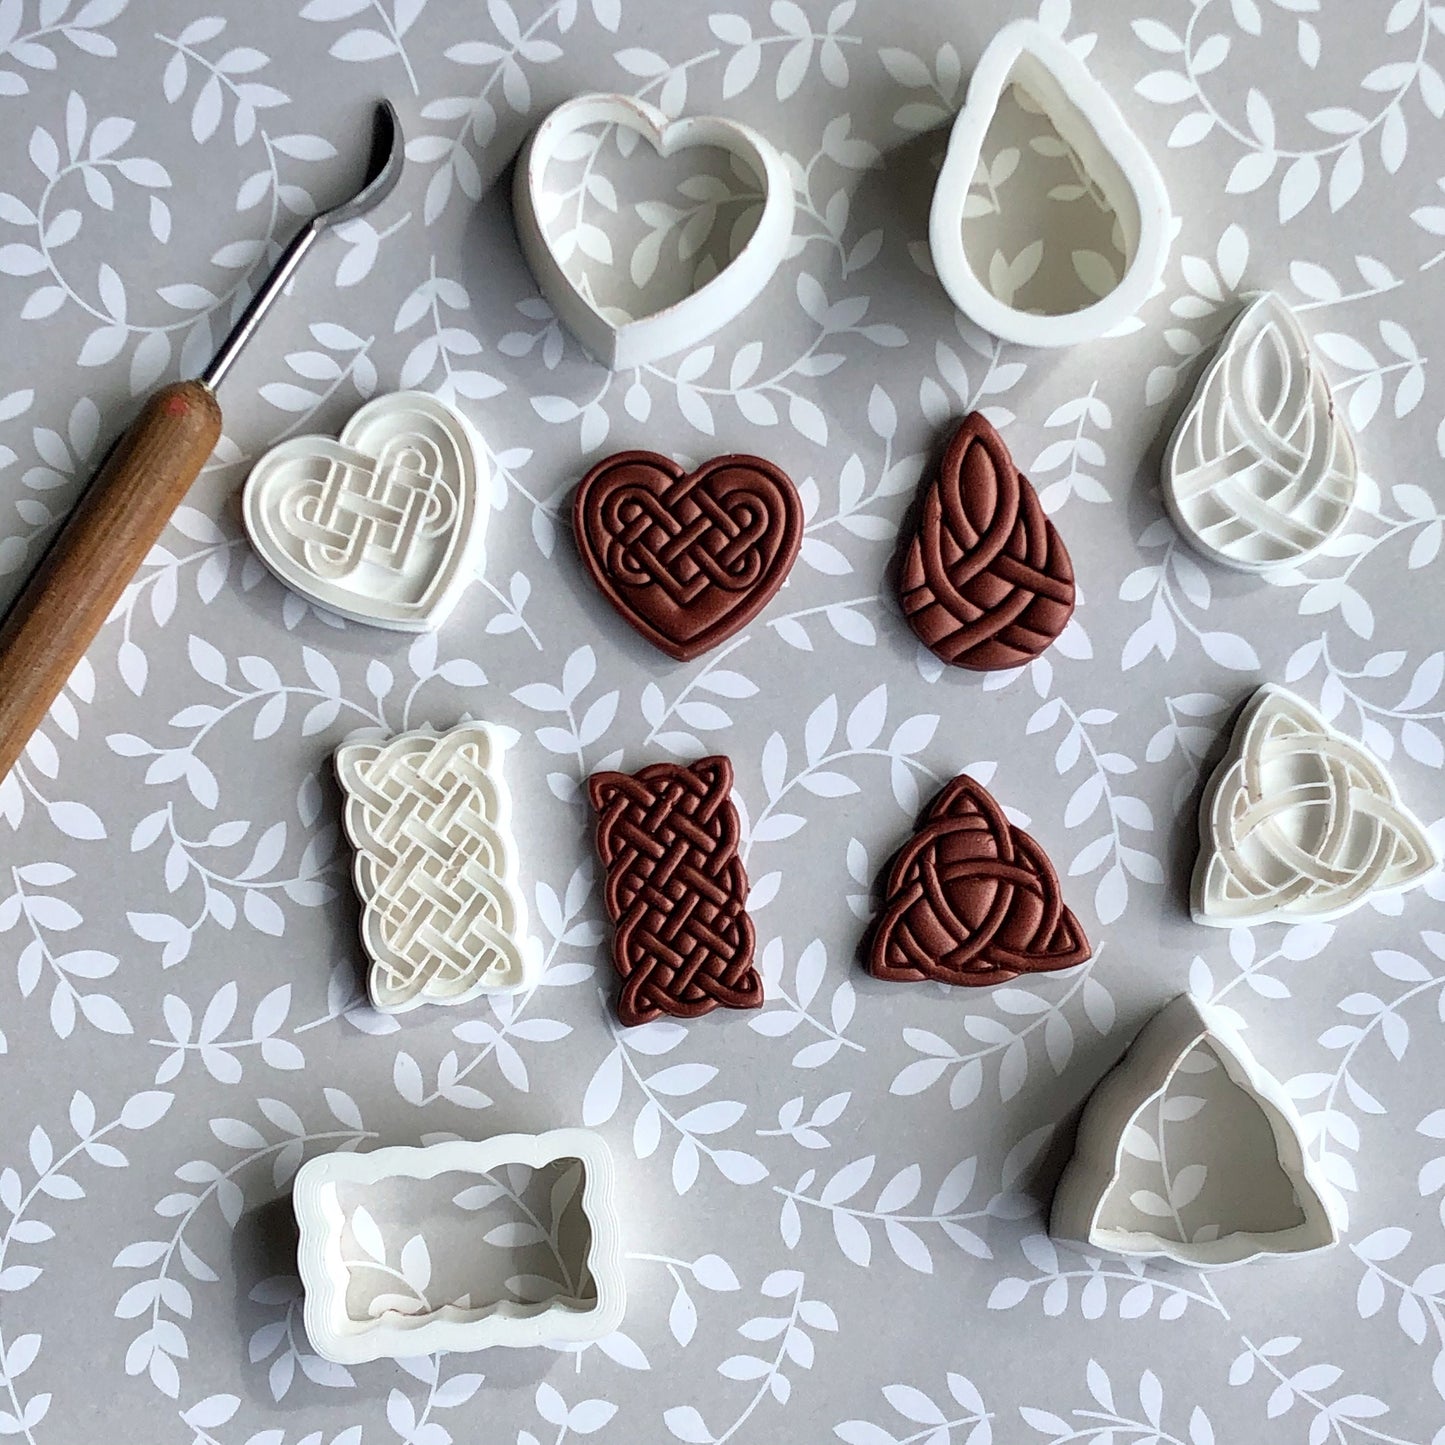 Celtic stamp set with matching cutters - made for use with polymer clay